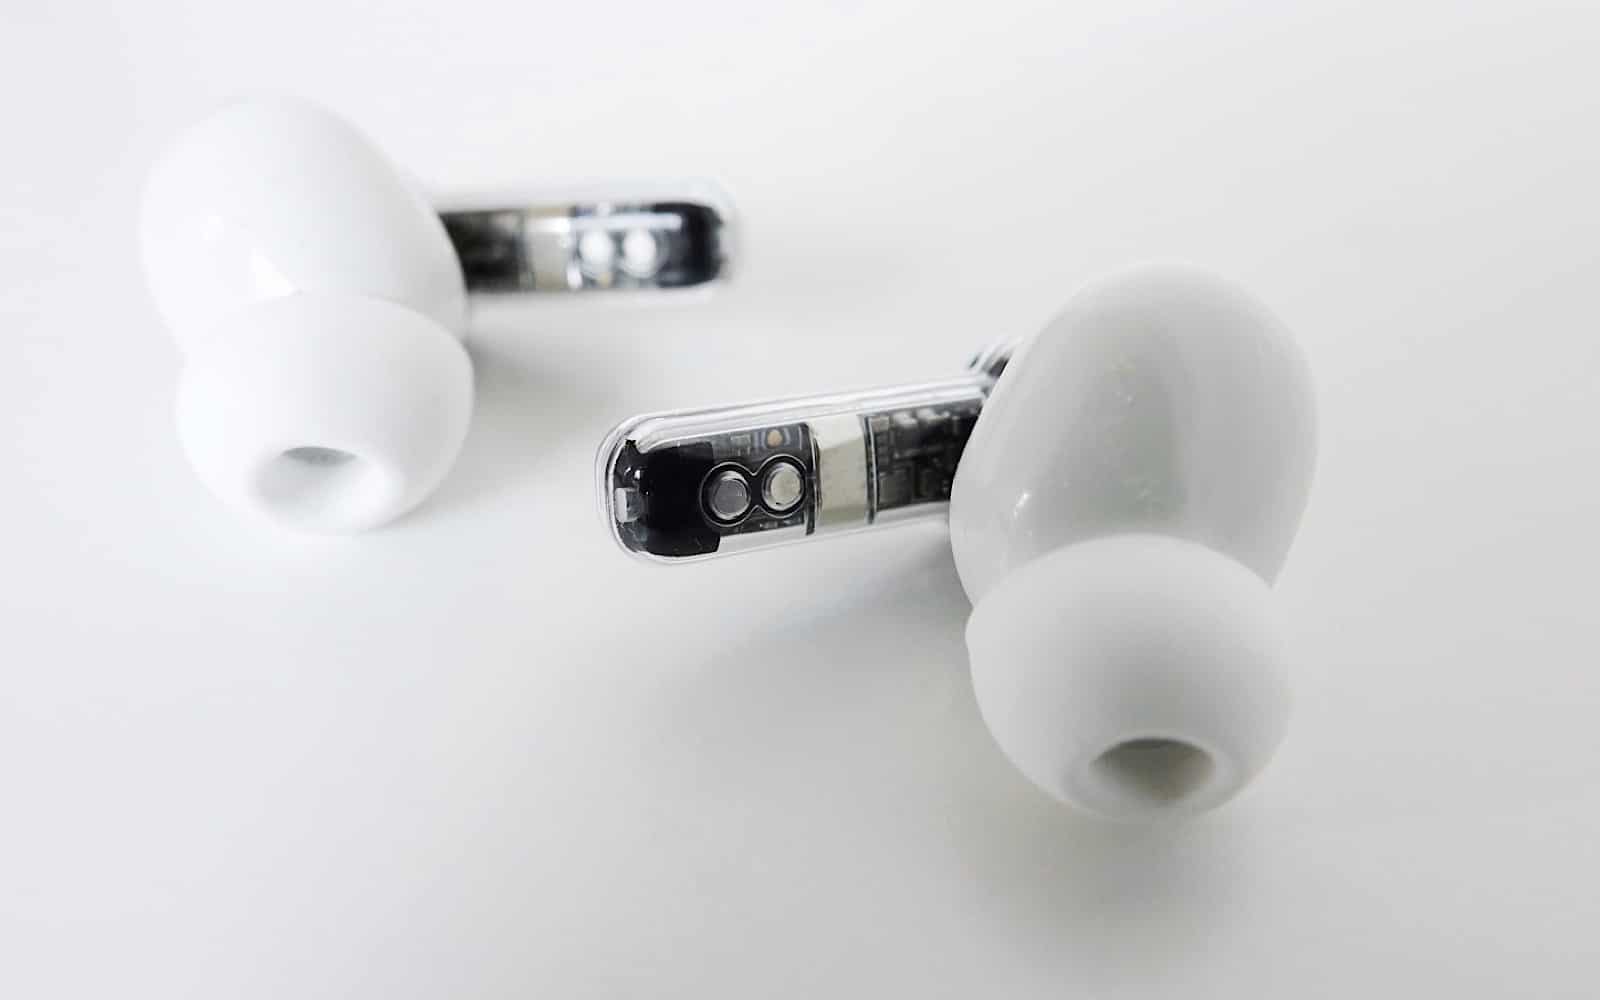 The Ear 1 earphones are visually striking with the transparent plastic.